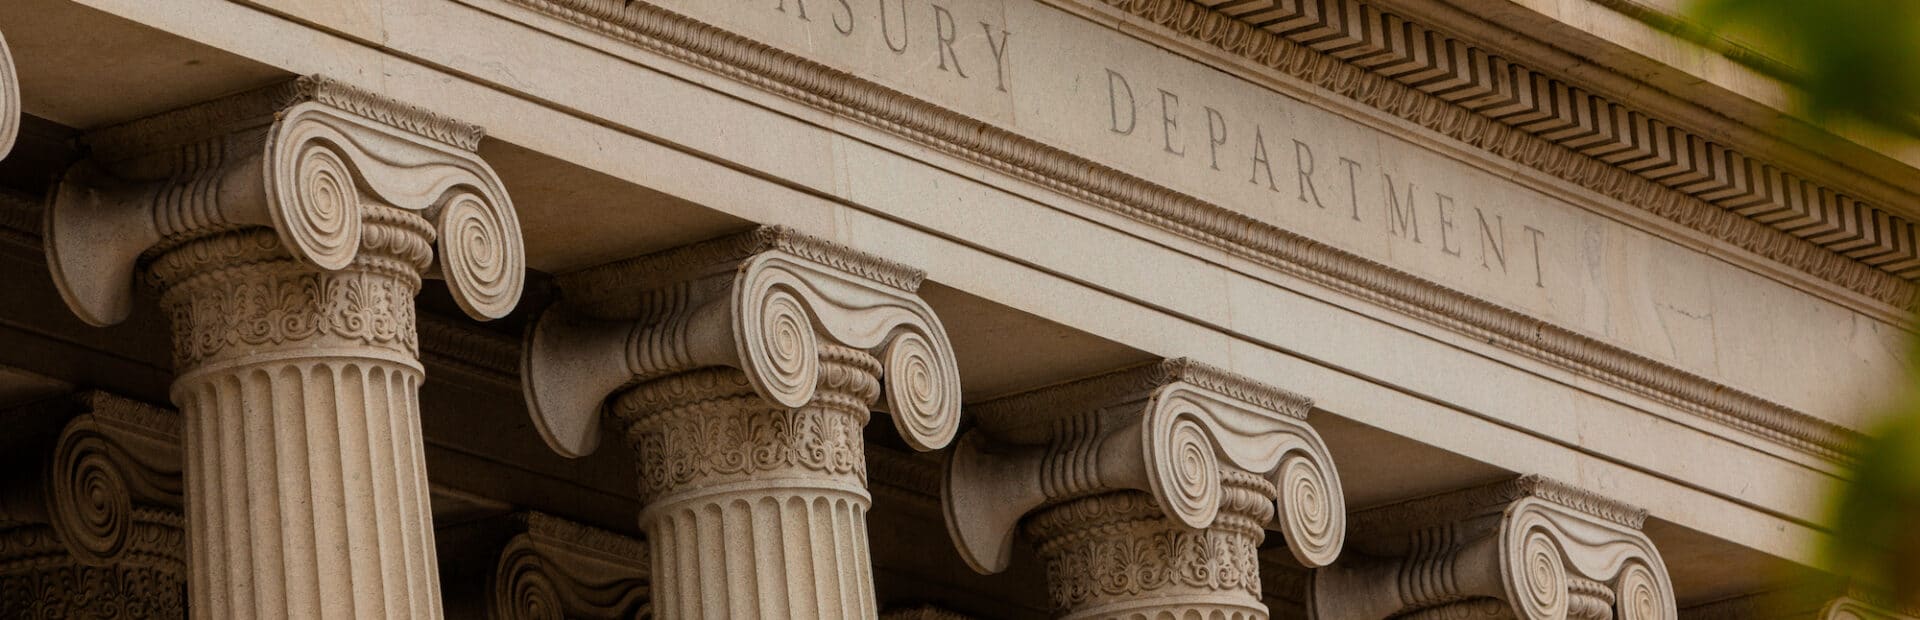 US Treasury Building: Wealth advisors can purchase t-bills on behalf of their clients